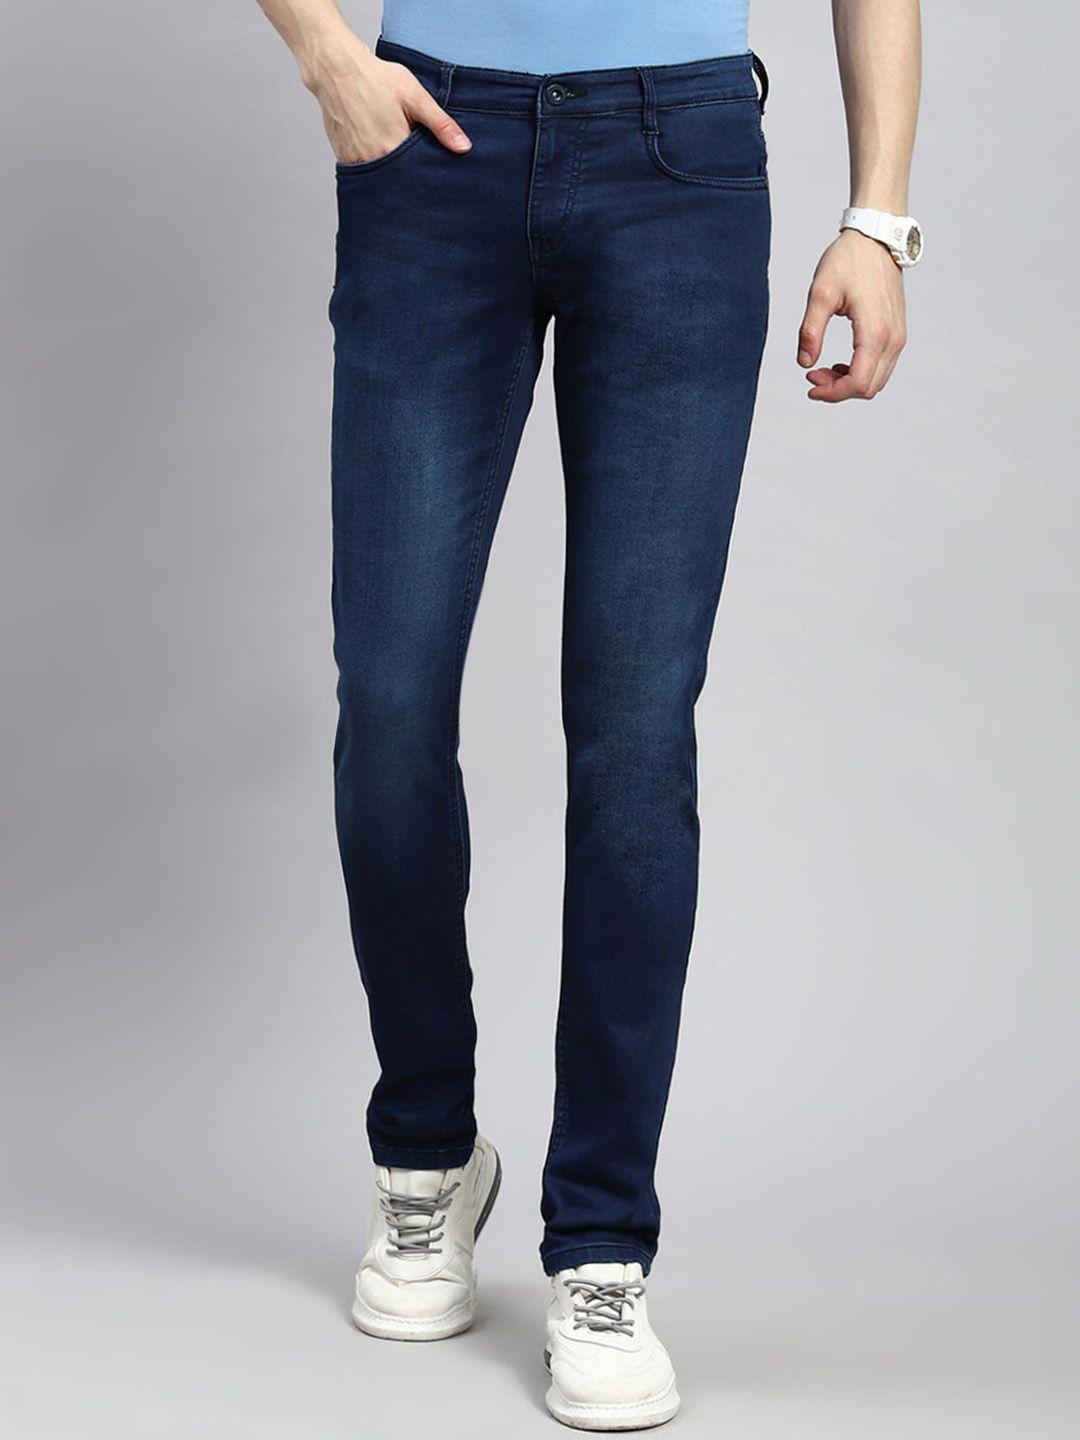 monte-carlo-men-mid-rise-skinny-fit-light-fade-jeans